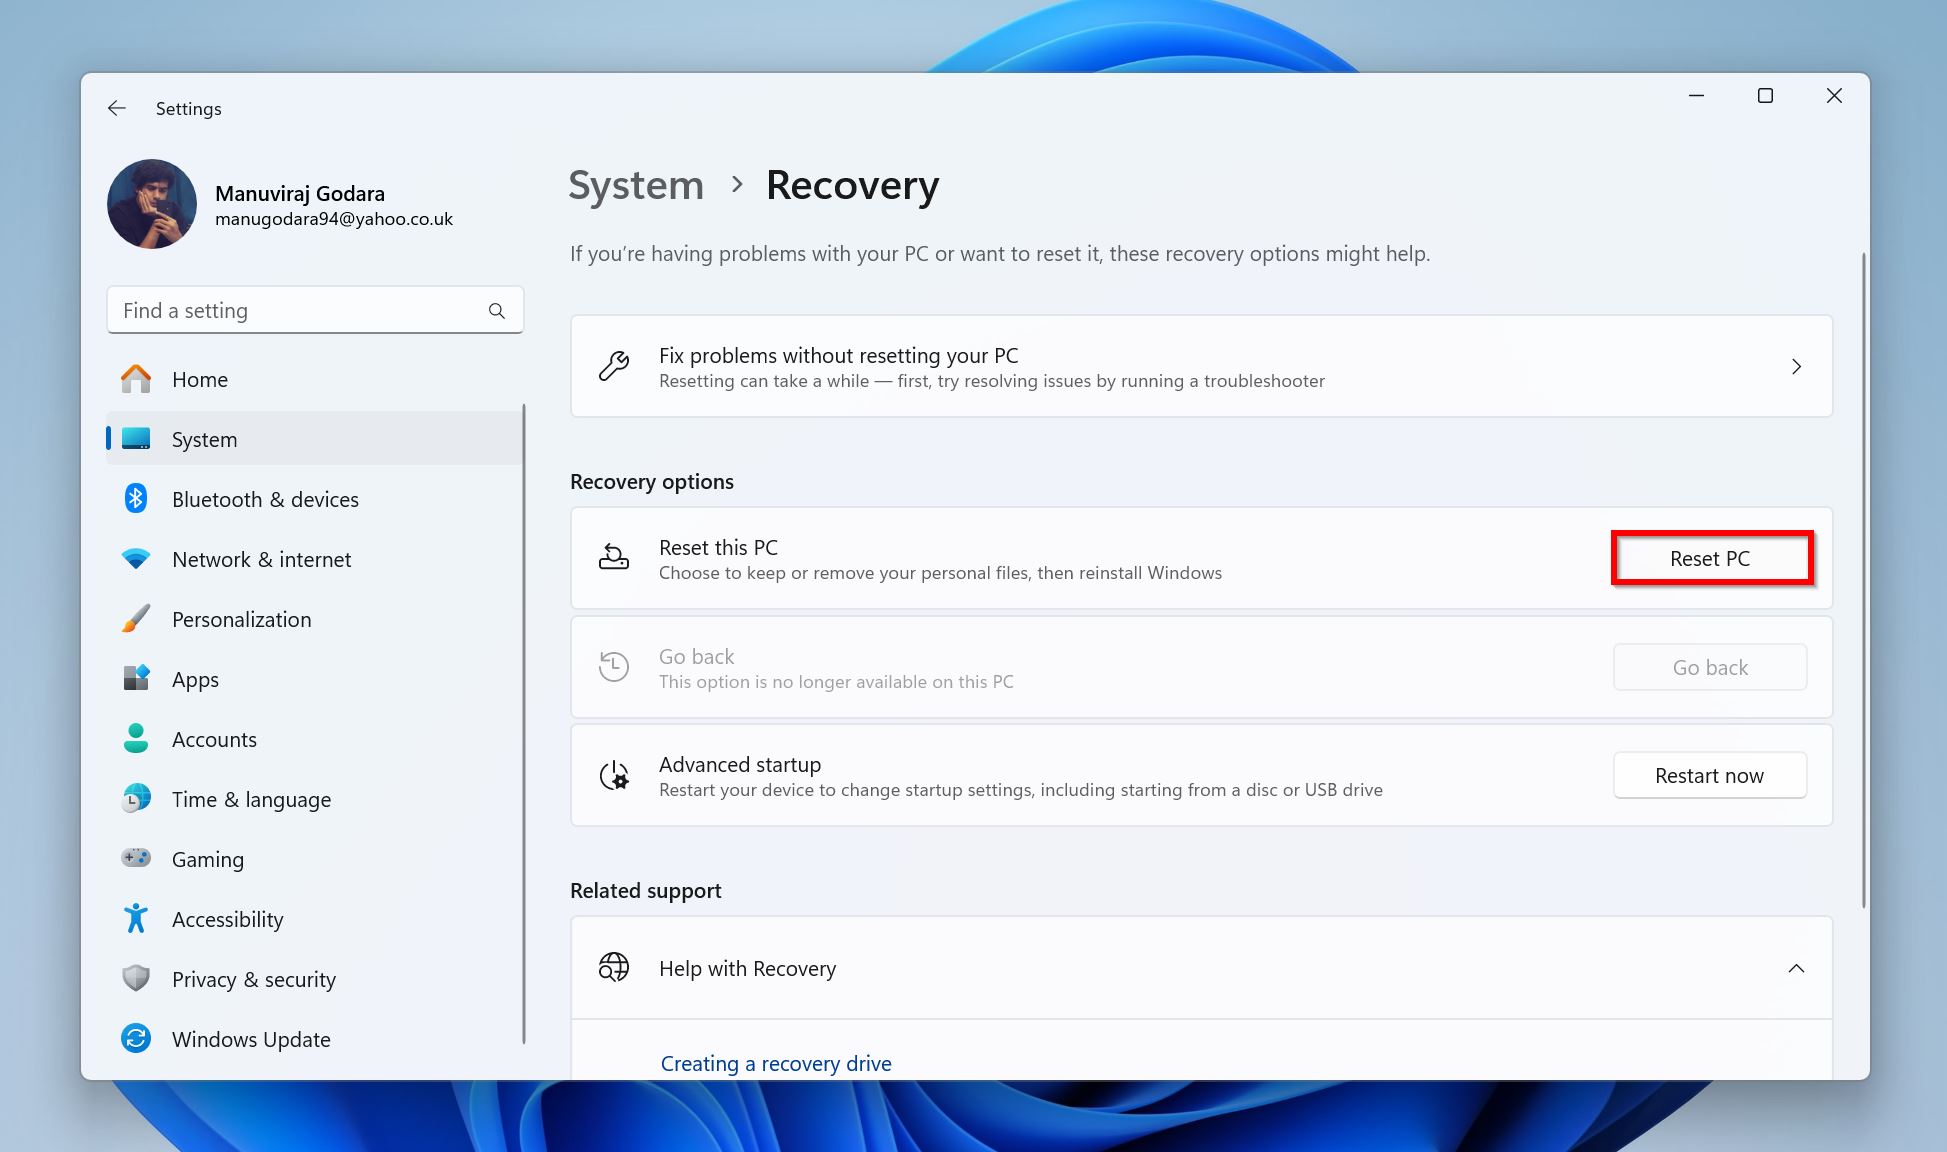 Reset PC button under System > Recovery.